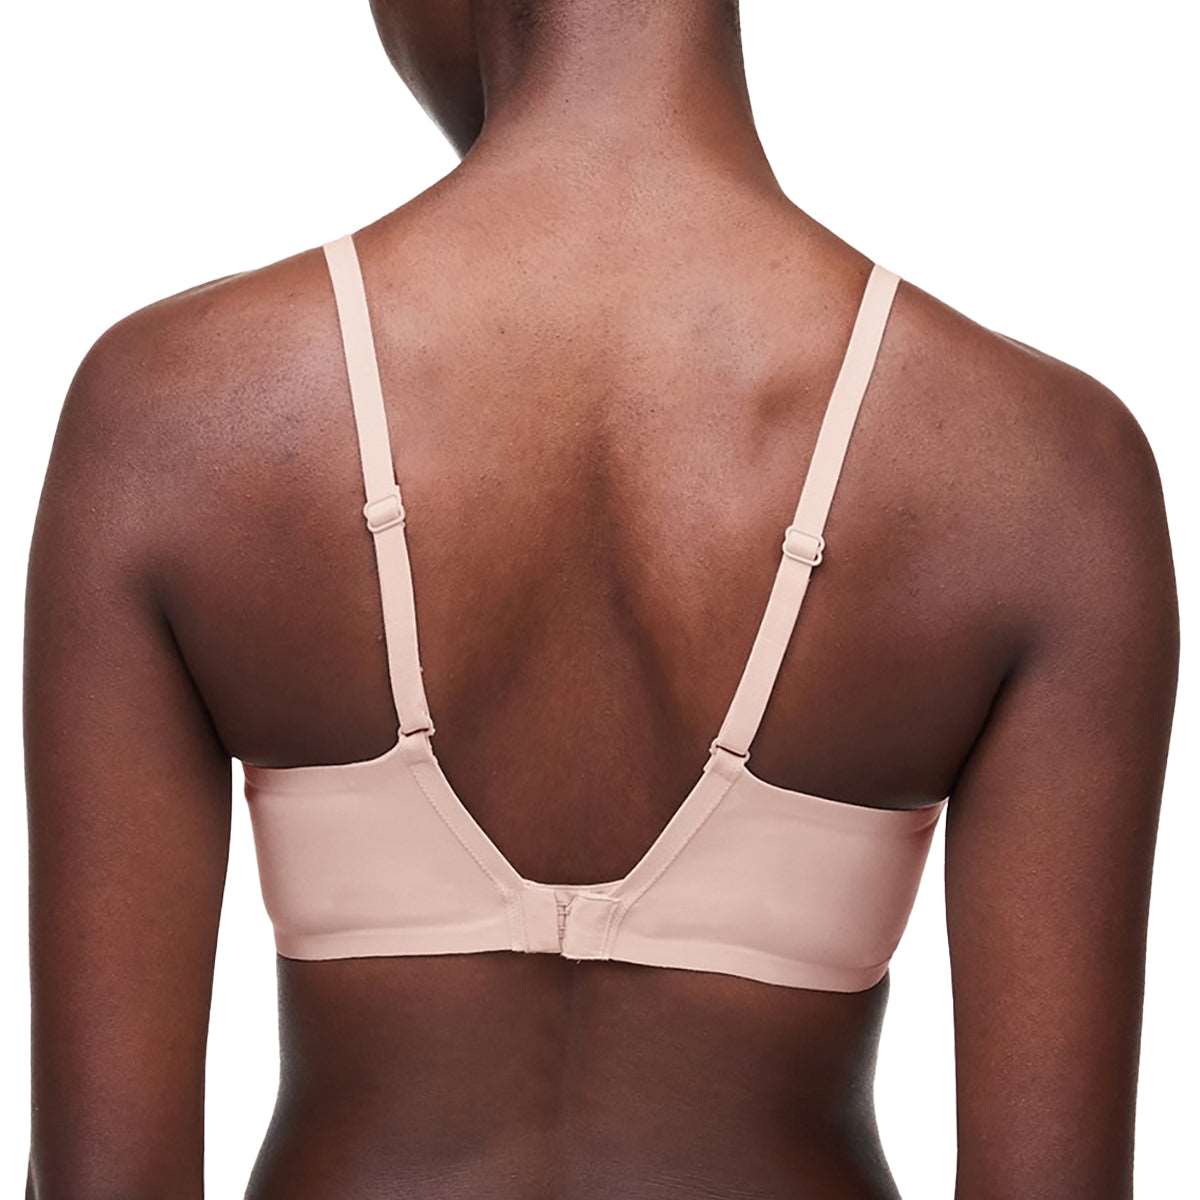 Buy Chantelle Soft Stretch Padded Bralette from Next Spain